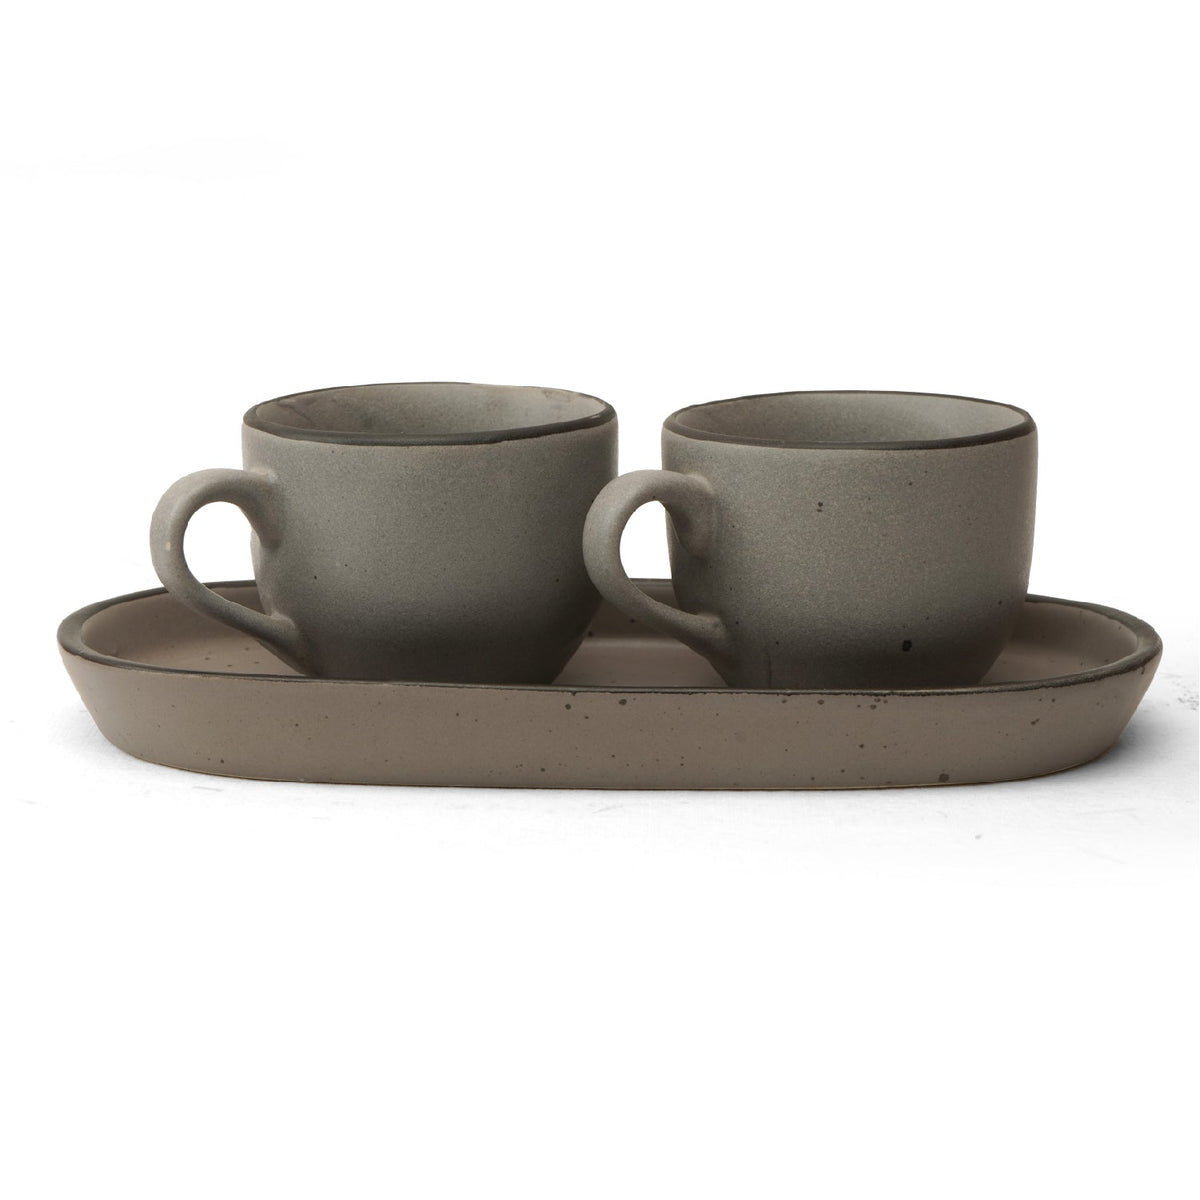 Claymistry Ceramic Saucer and Cup Combo | Grey with Black Rim Matte Cupset| Set of 6 | Coffee Mugs | Ceramic Combos | Tea Kettles